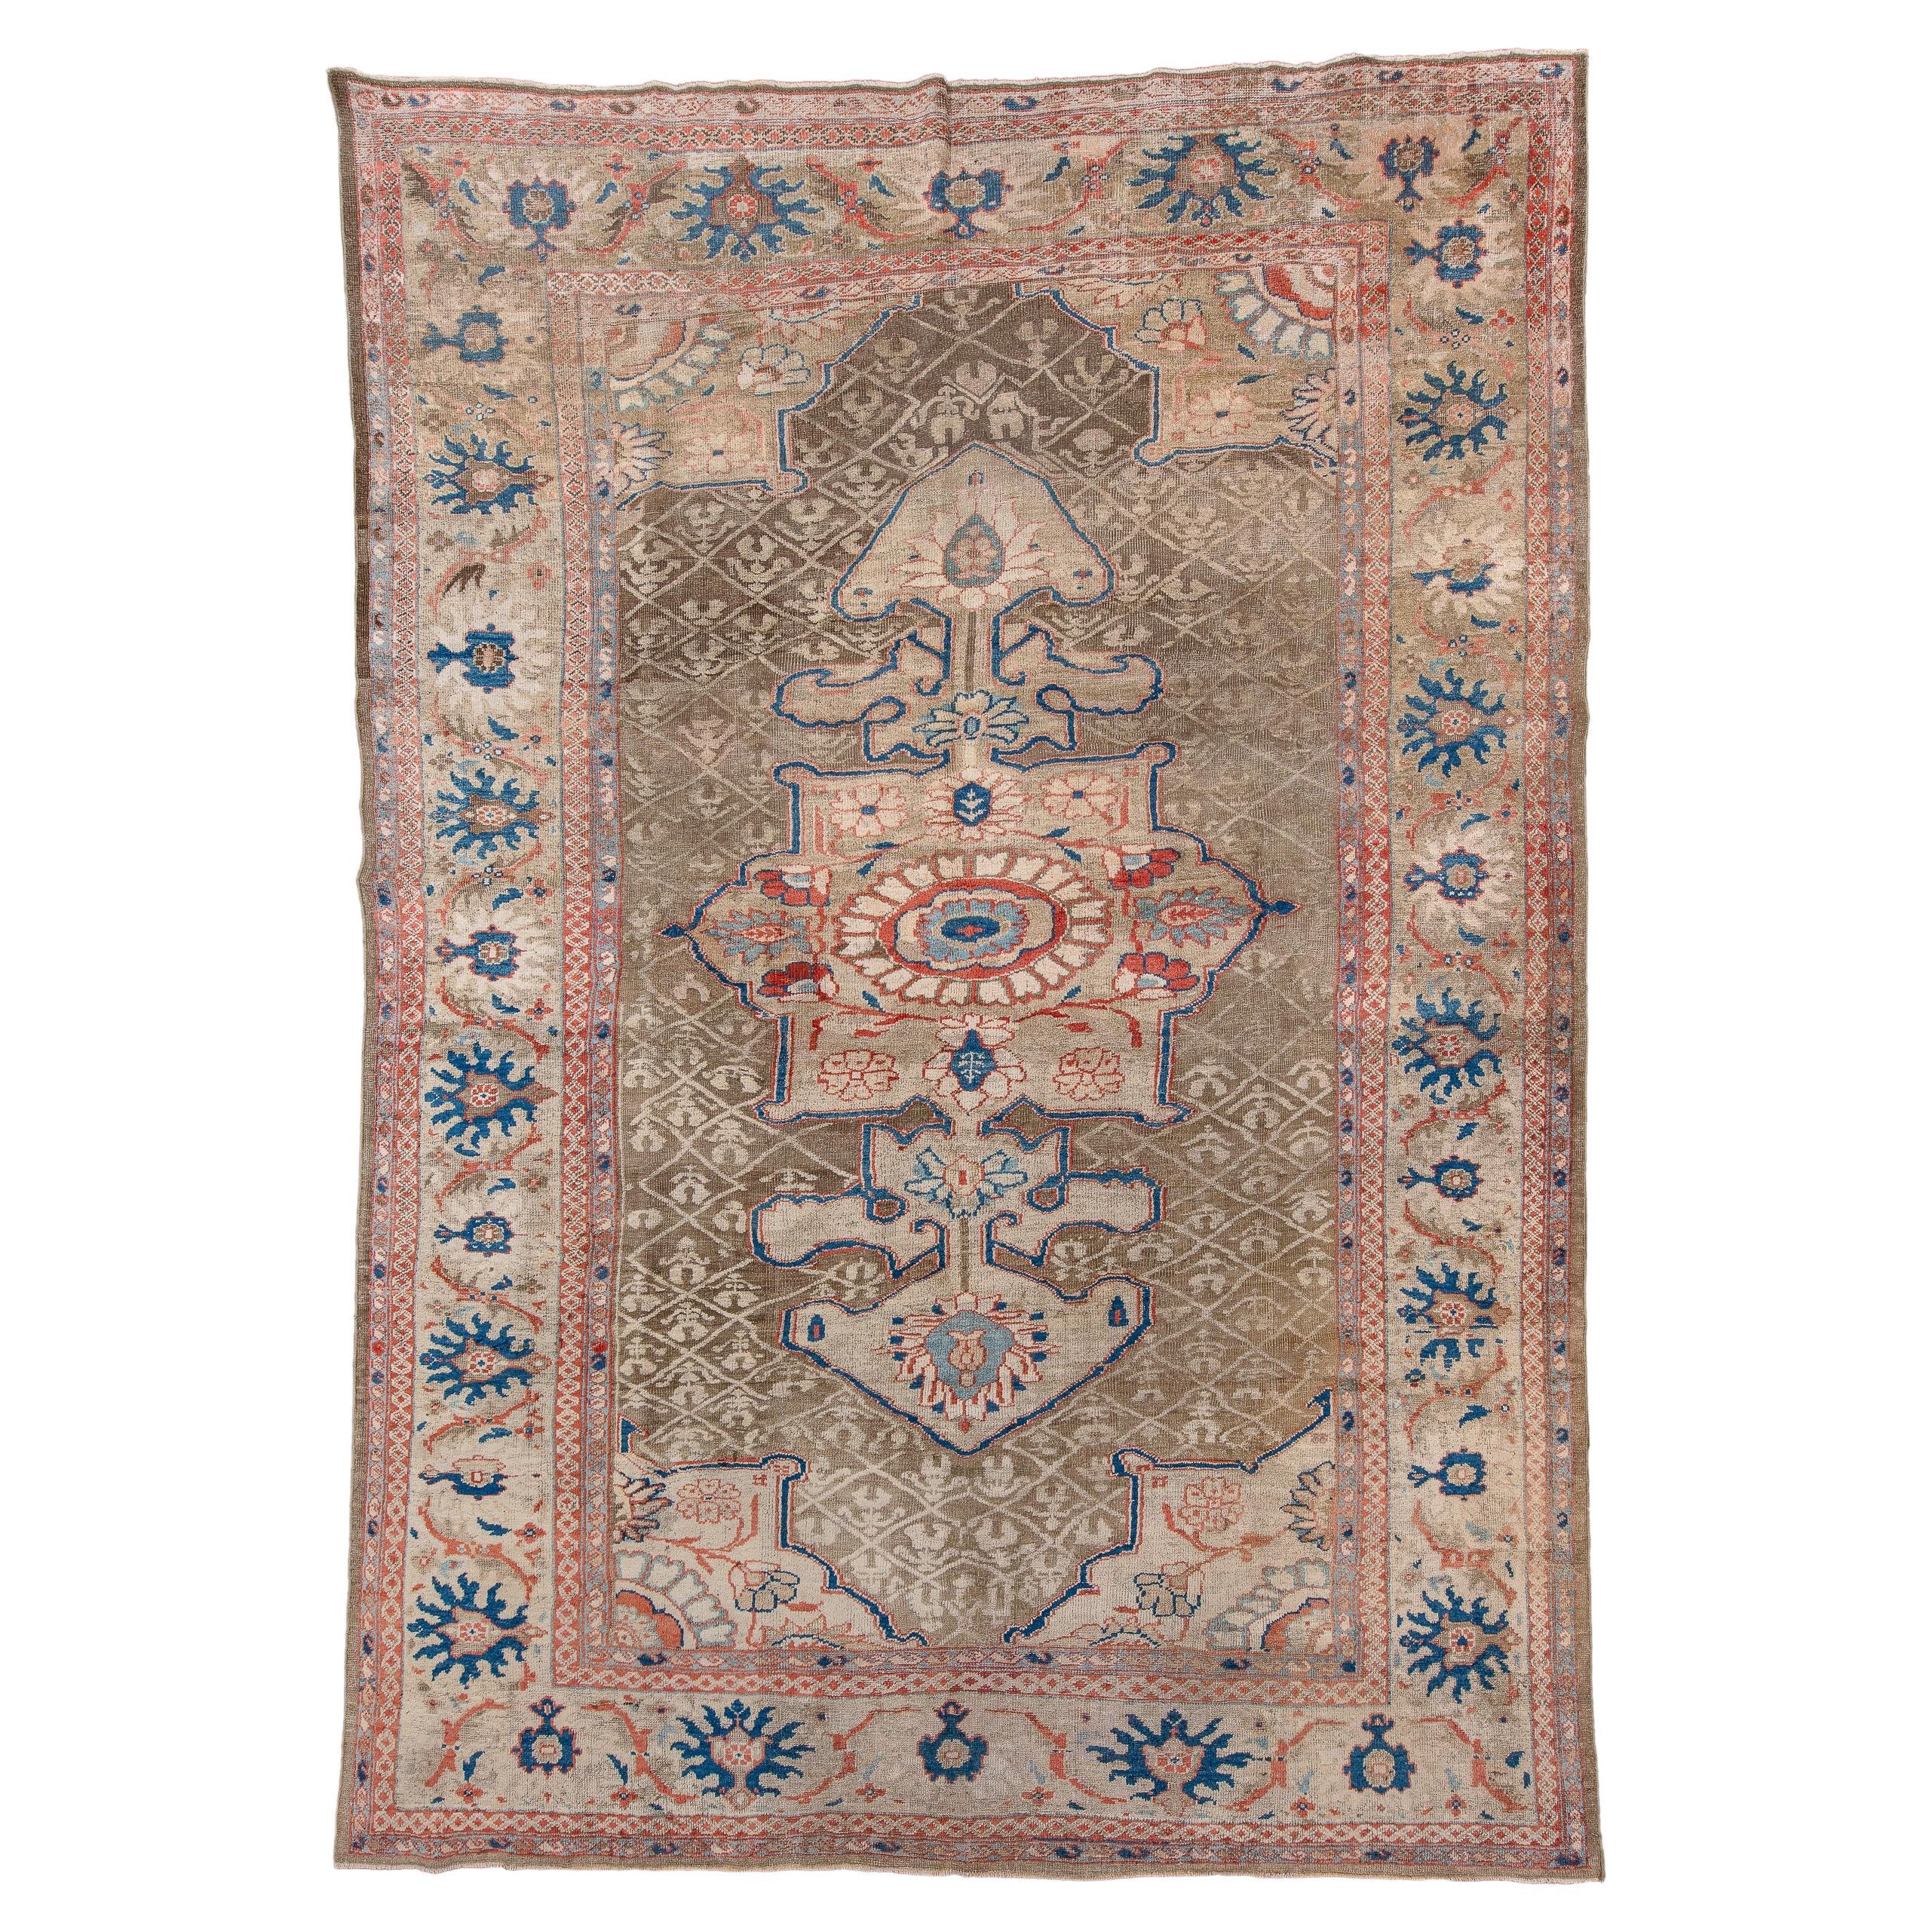 Unique Antique Sultanabad Rug with Rust Field and Blue Details, Circa 1900's